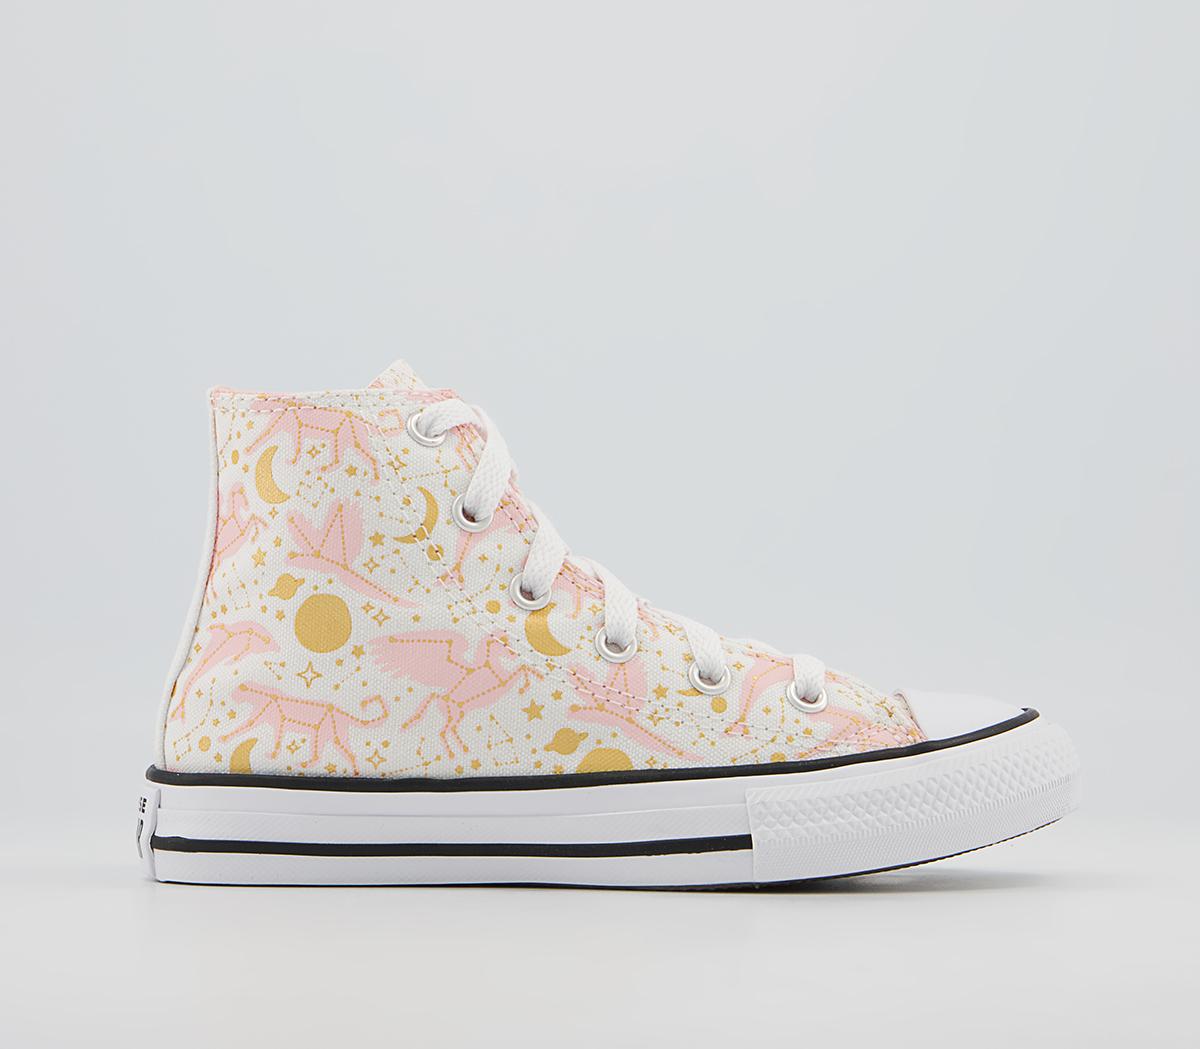 ConverseAll Star Hi Youth TrainersWhite Pink Gold Constellation